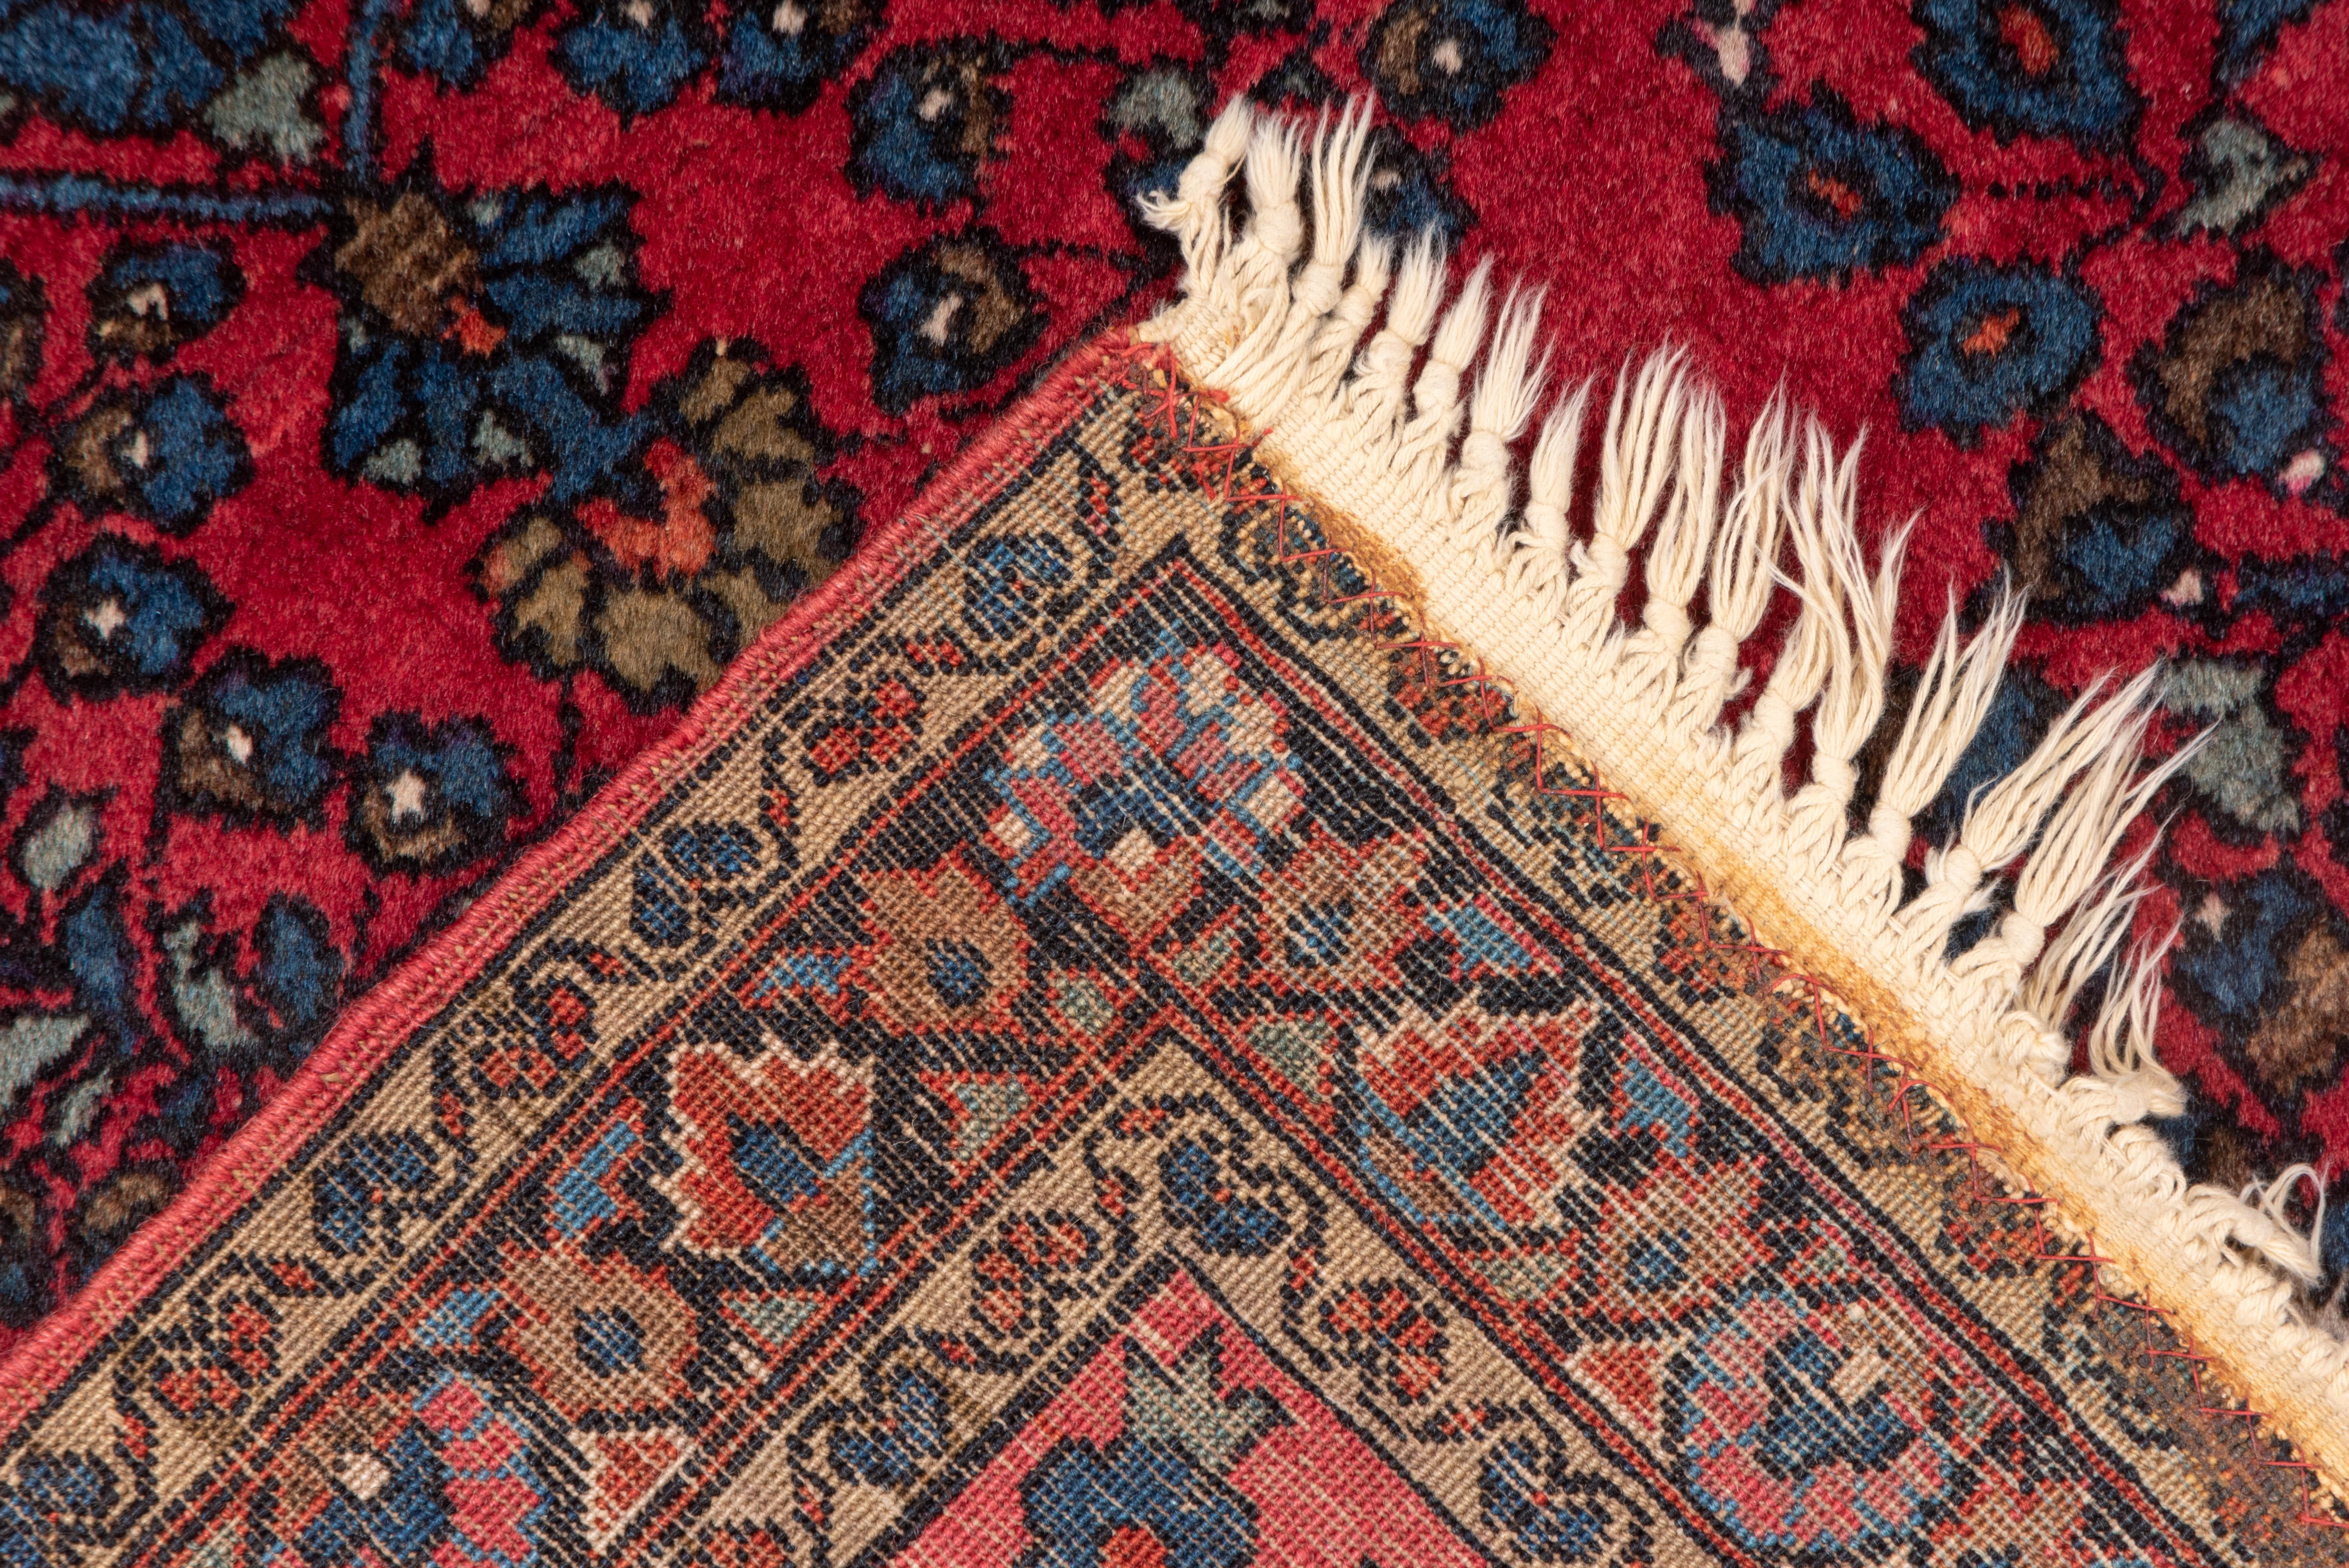 Mid-20th Century Persian Sarouk Rug, Red Field, Medium Pile, Blue Acents For Sale 1